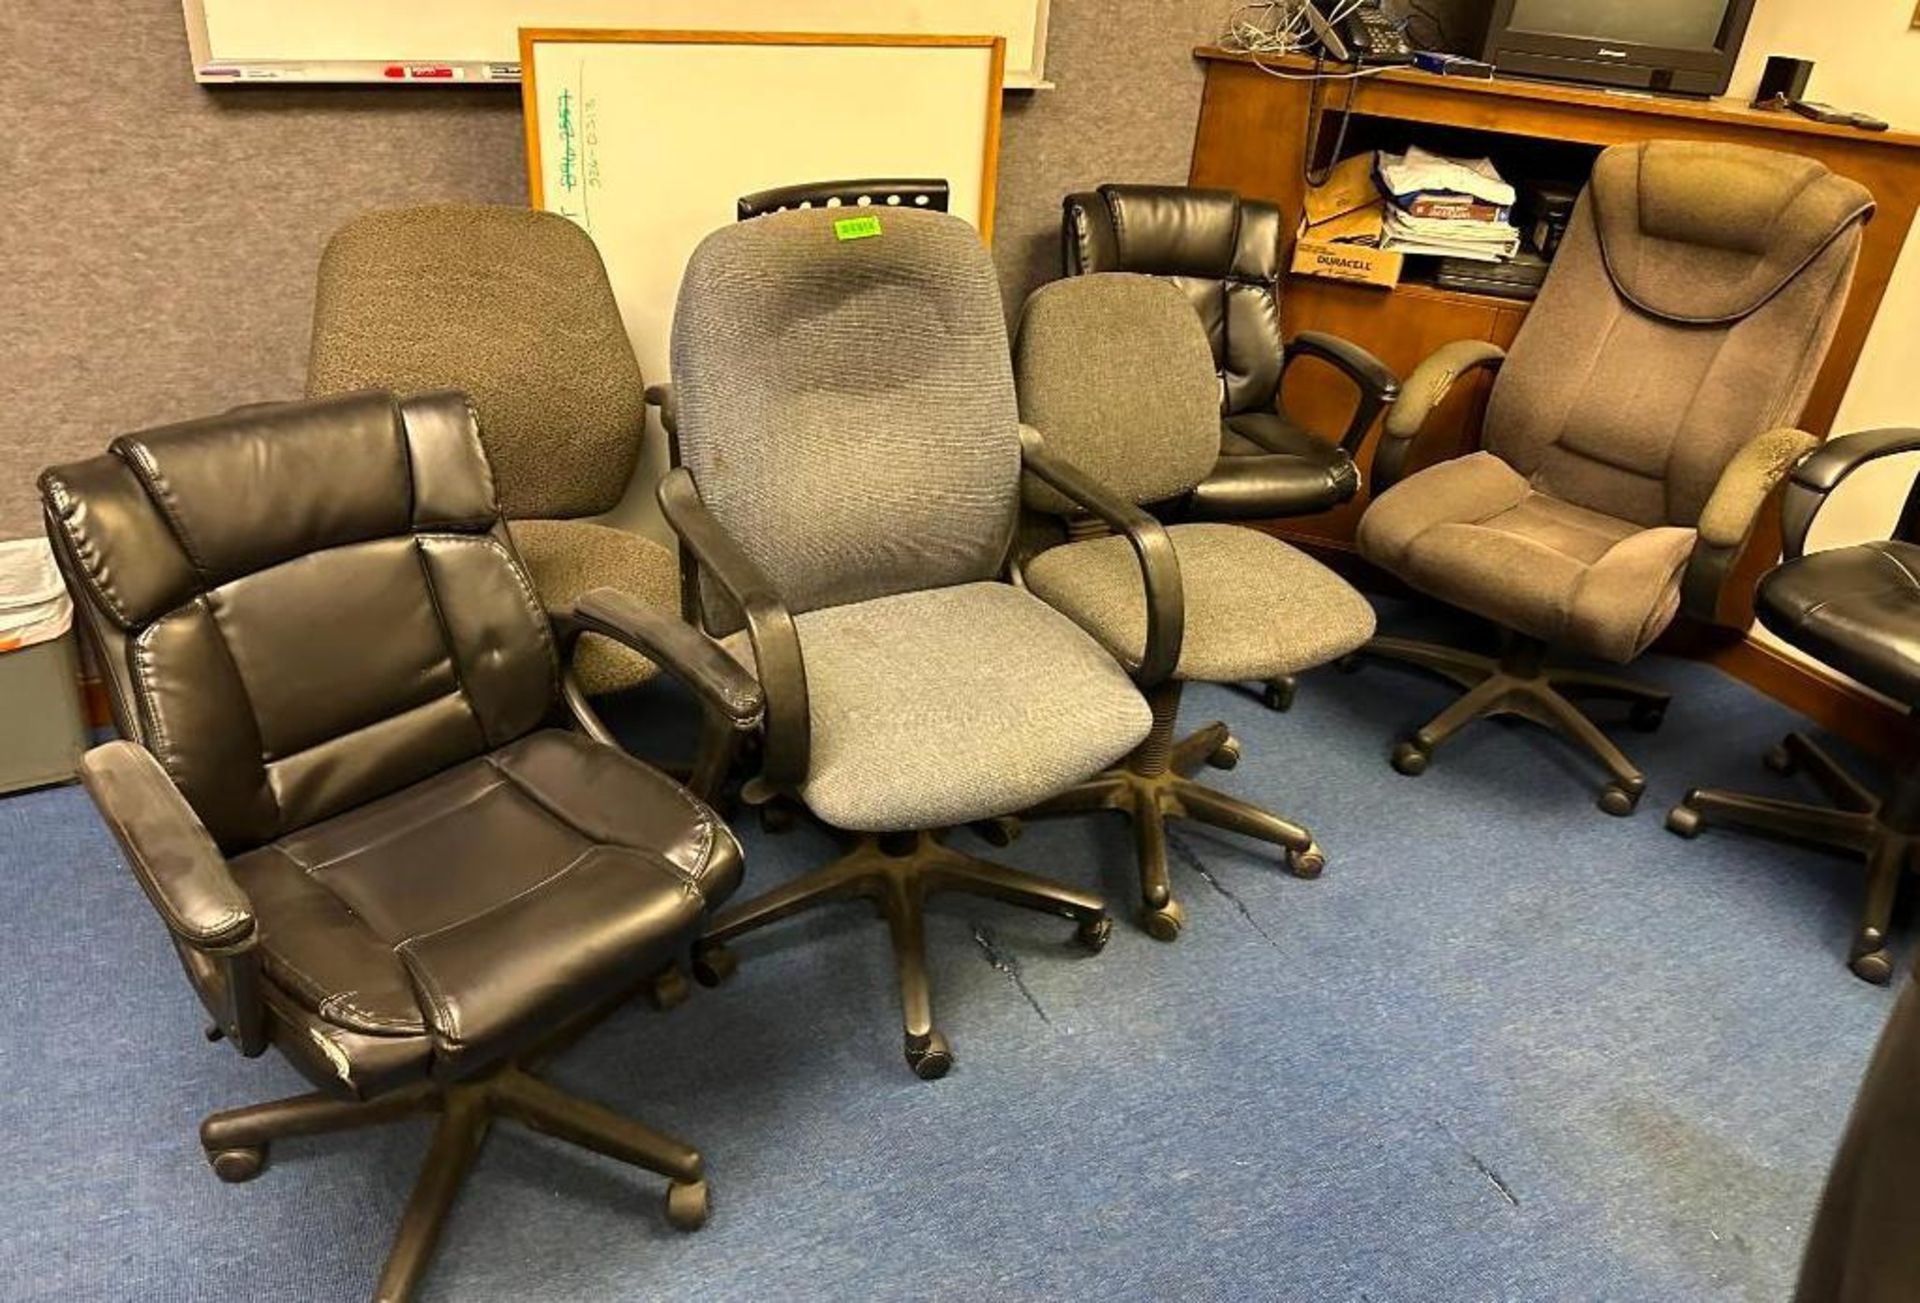 ASSORTED OFFICE CHAIRS AS SHOWN